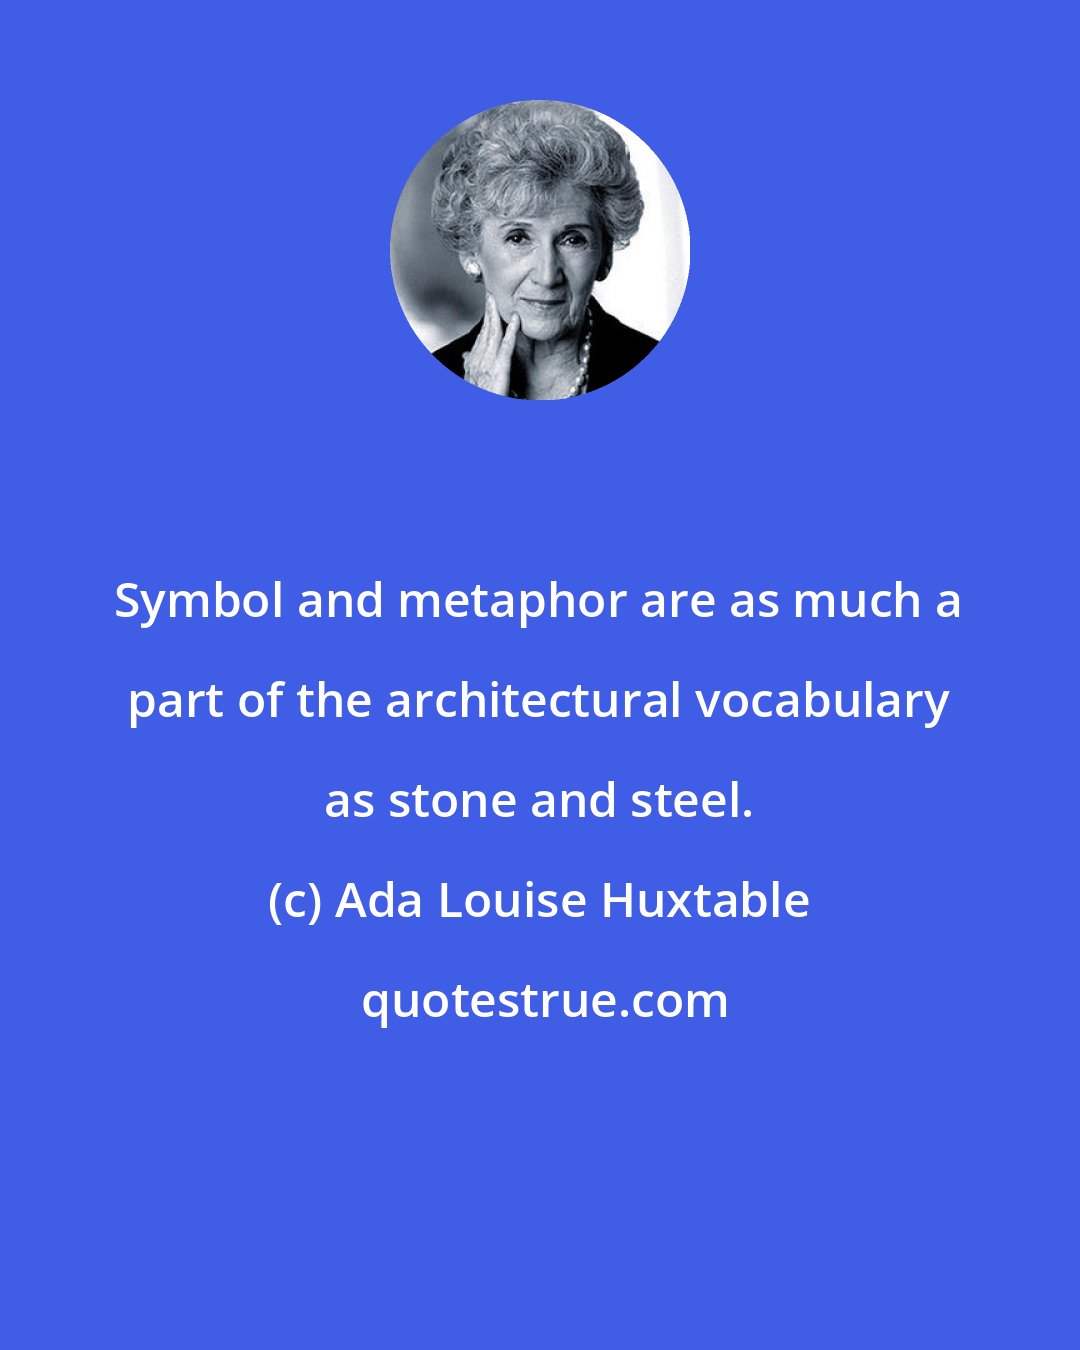 Ada Louise Huxtable: Symbol and metaphor are as much a part of the architectural vocabulary as stone and steel.